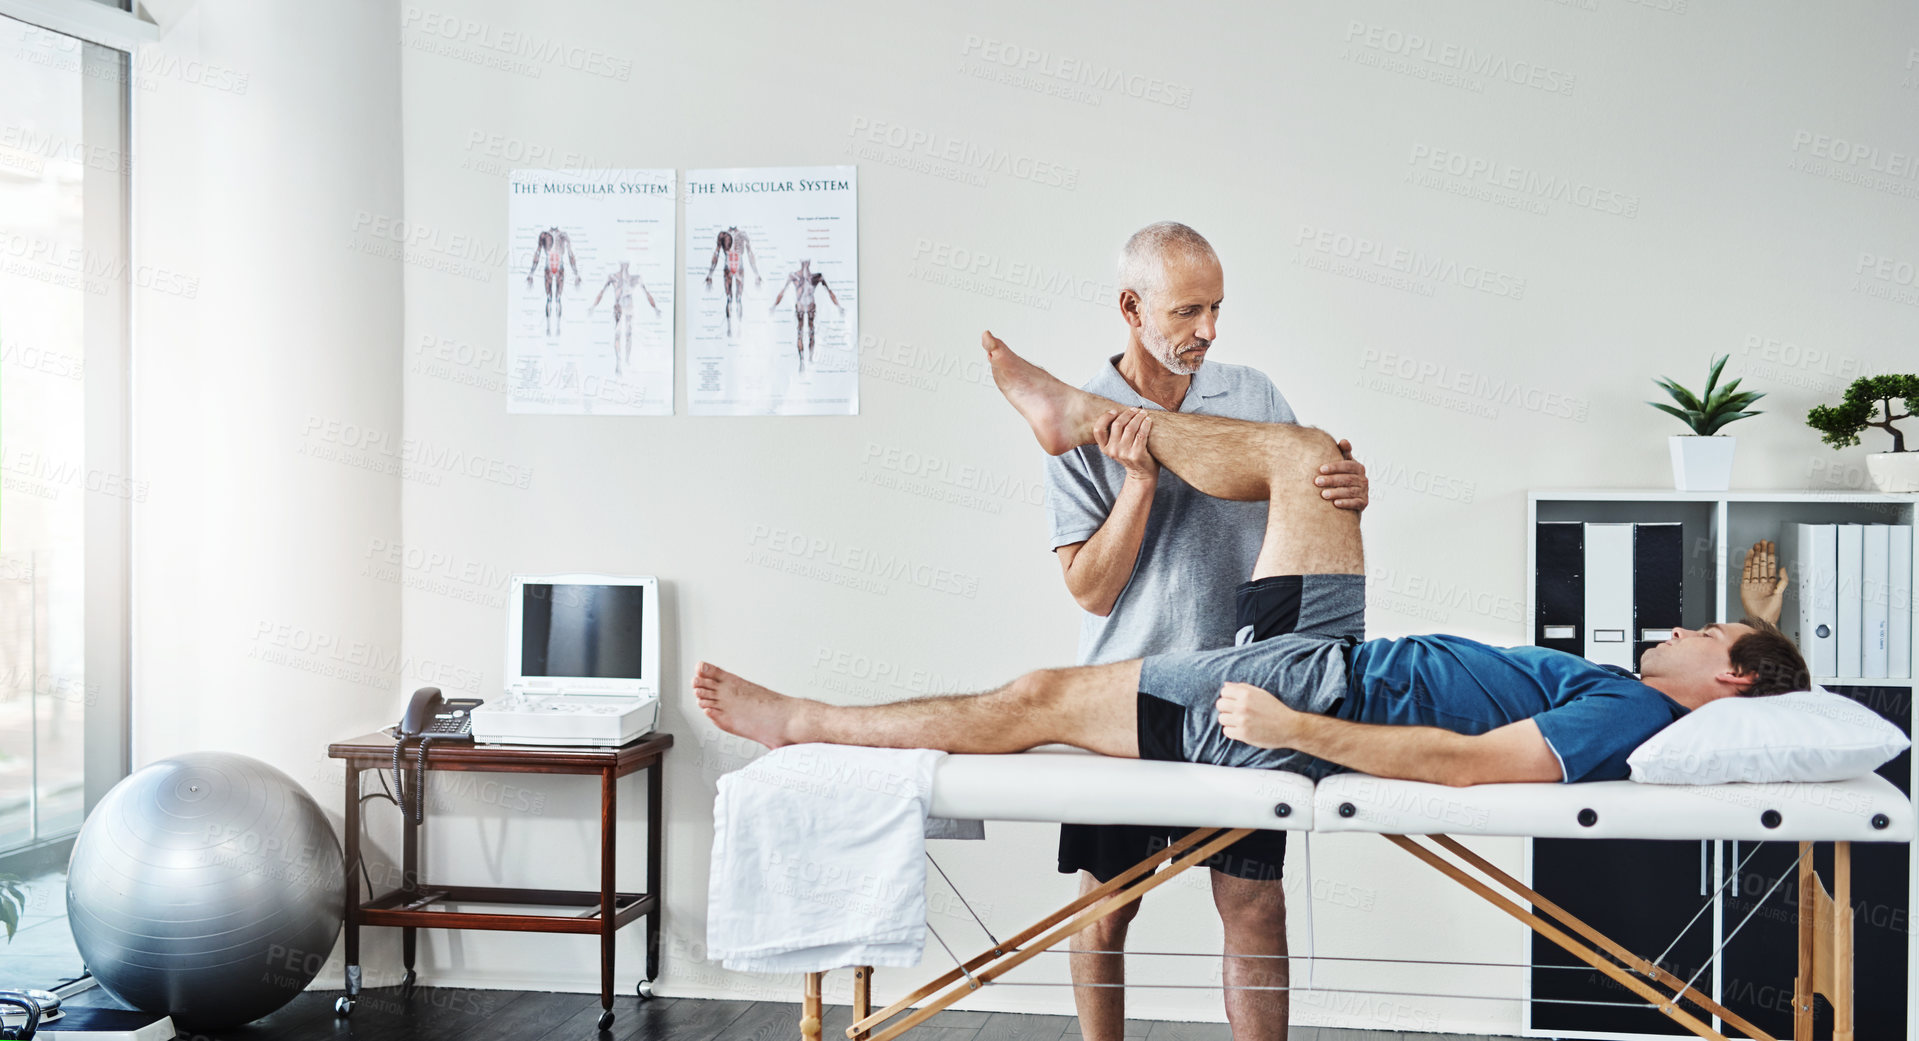 Buy stock photo Support, physiotherapist or patient with leg injury, recovery or healthcare for wellness. Male person, client or chiropractor with skills, stretching legs or consultation for physiotherapy or healing